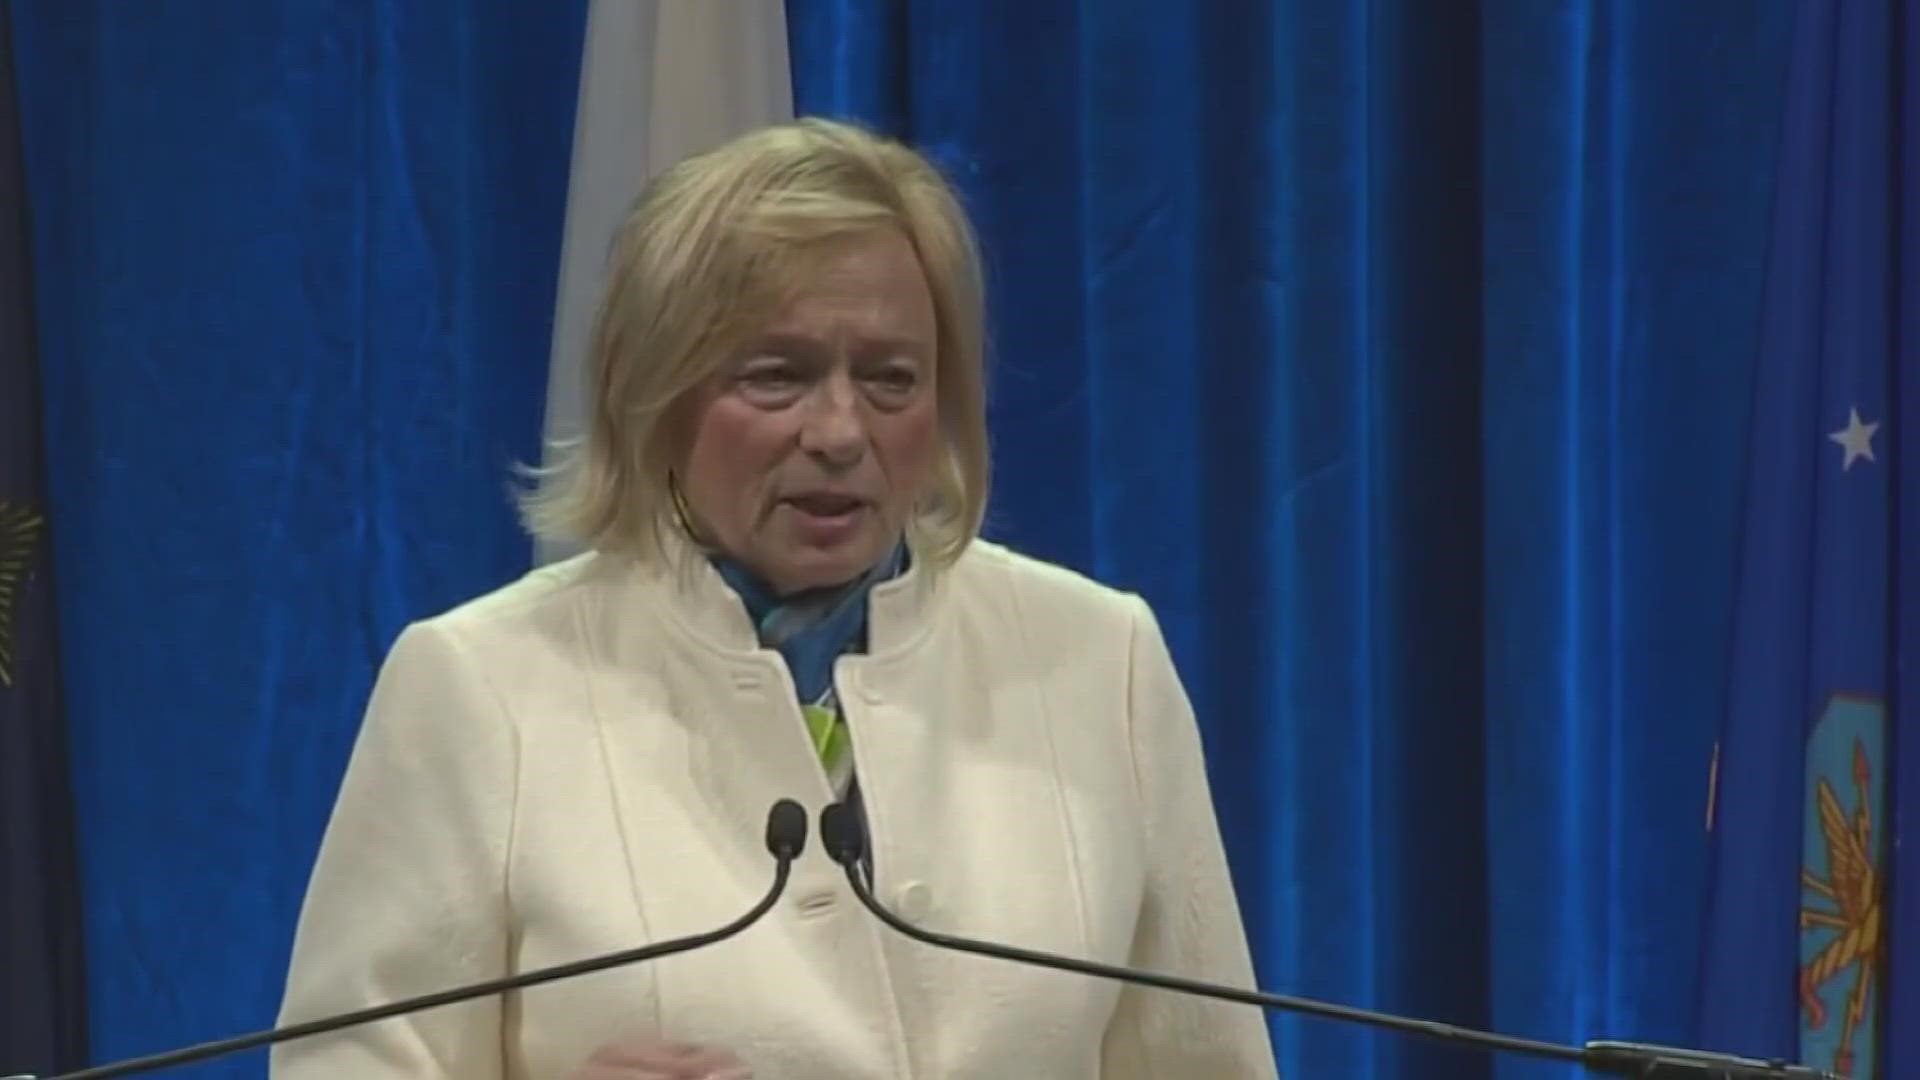 The governor's office says Gov. Janet Mills will highlight her latest budget proposal in front of the Maine legislature.